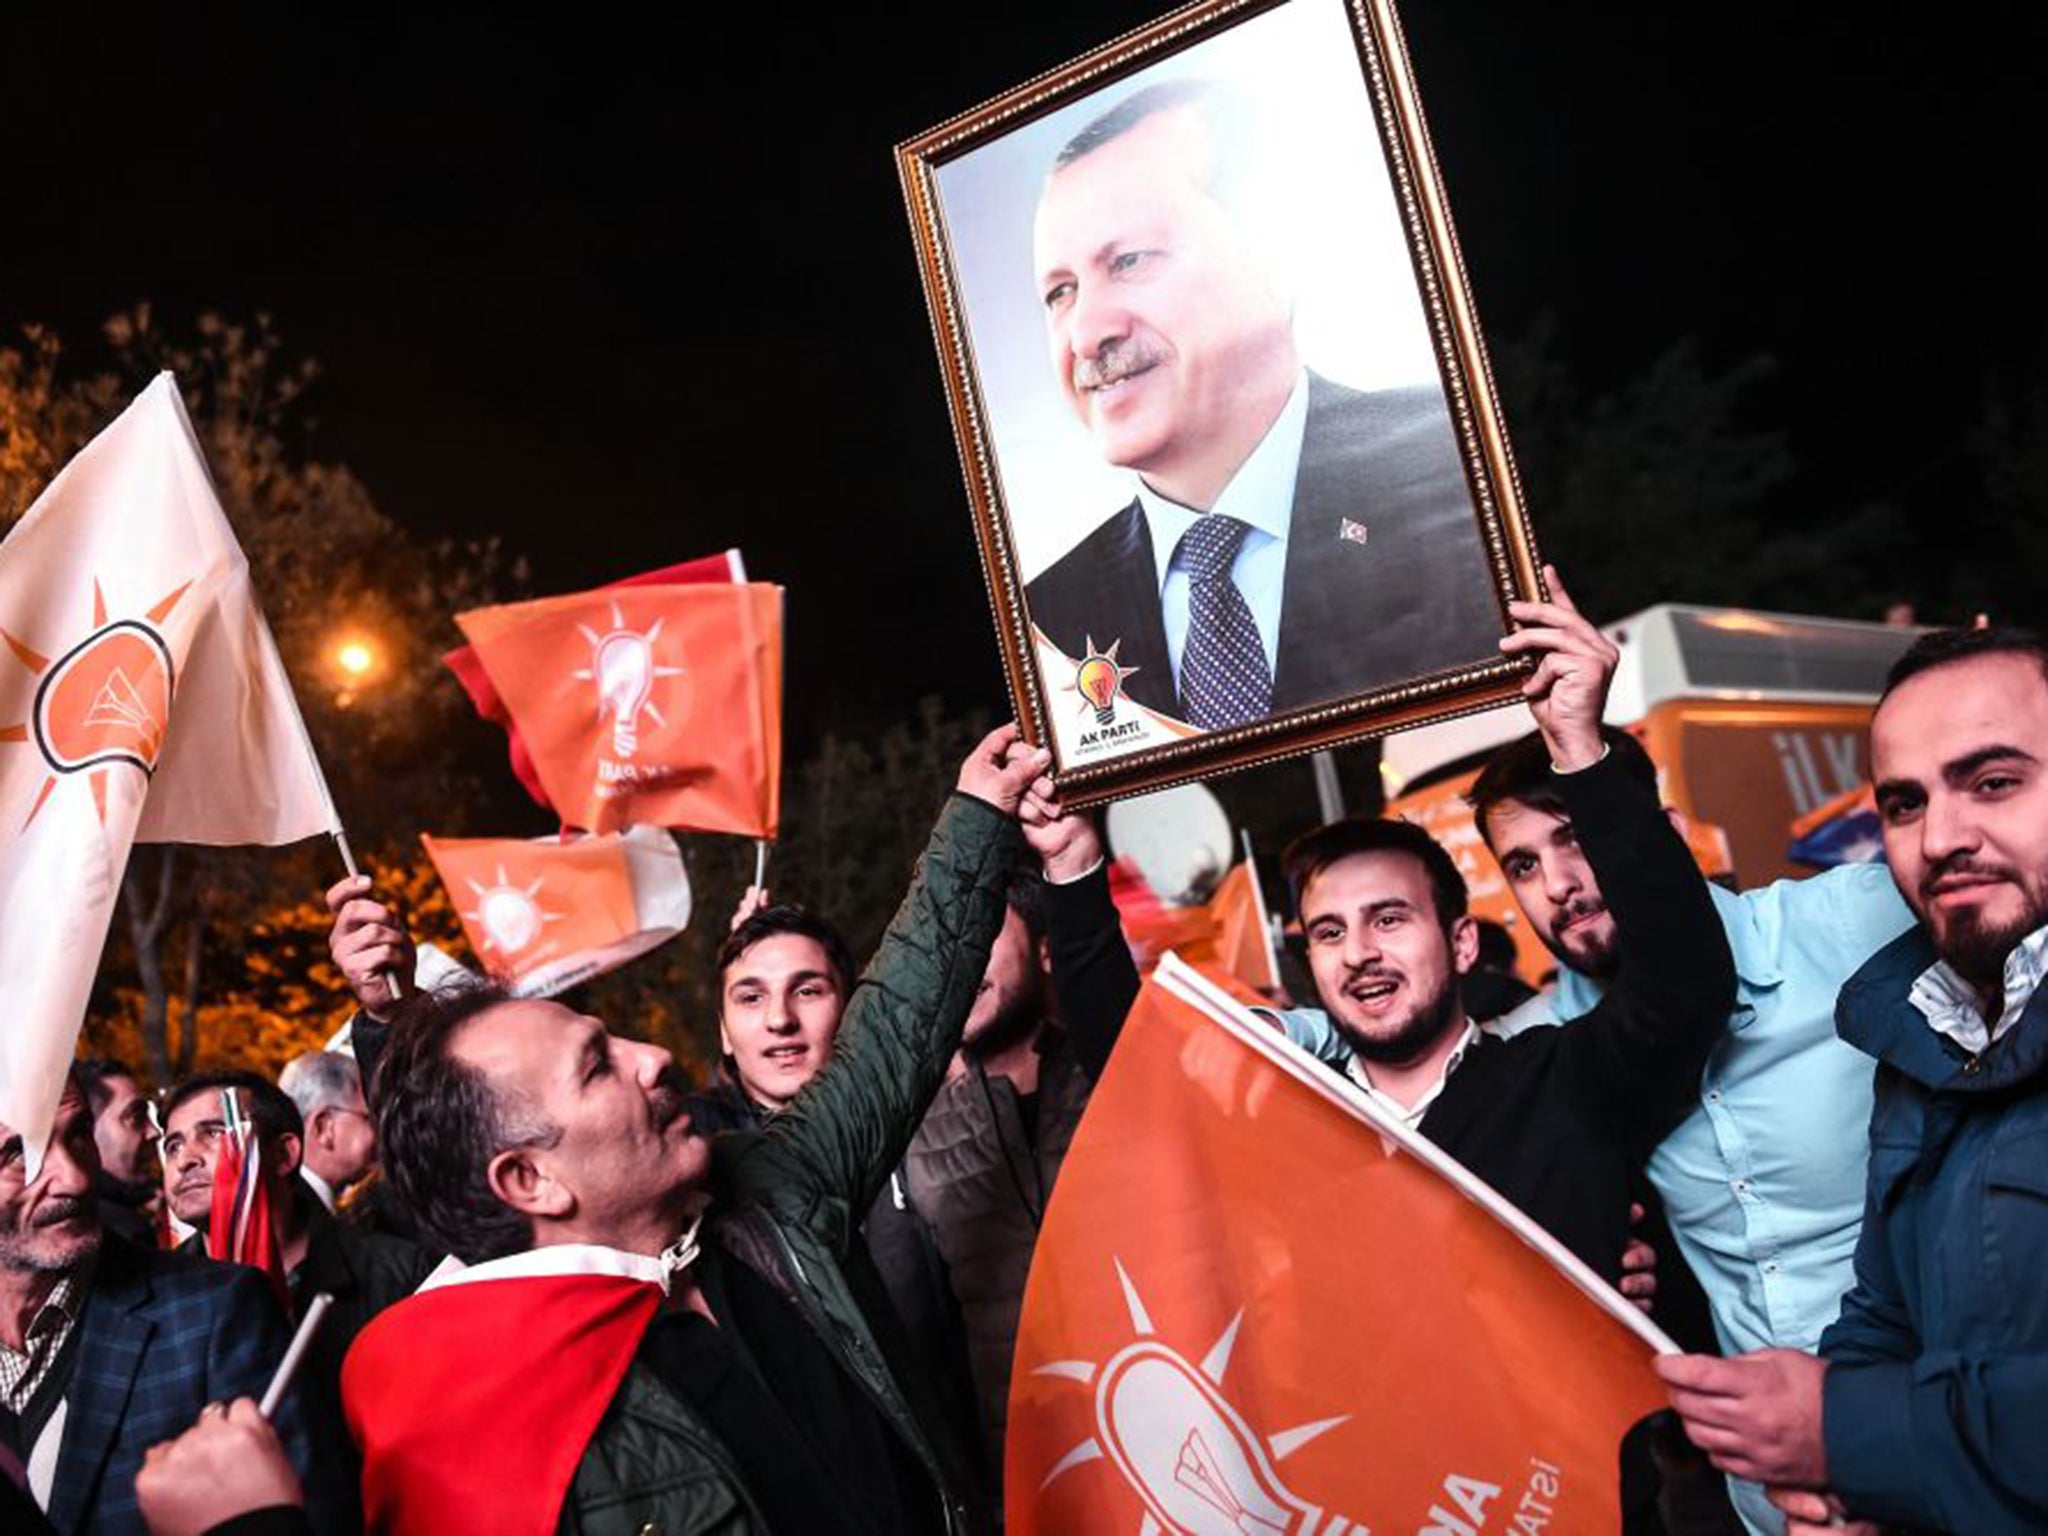 President Erdogan's Justice and Development Party (AKP) won a decisive victory in the Turkish parliamentary election on Sunday